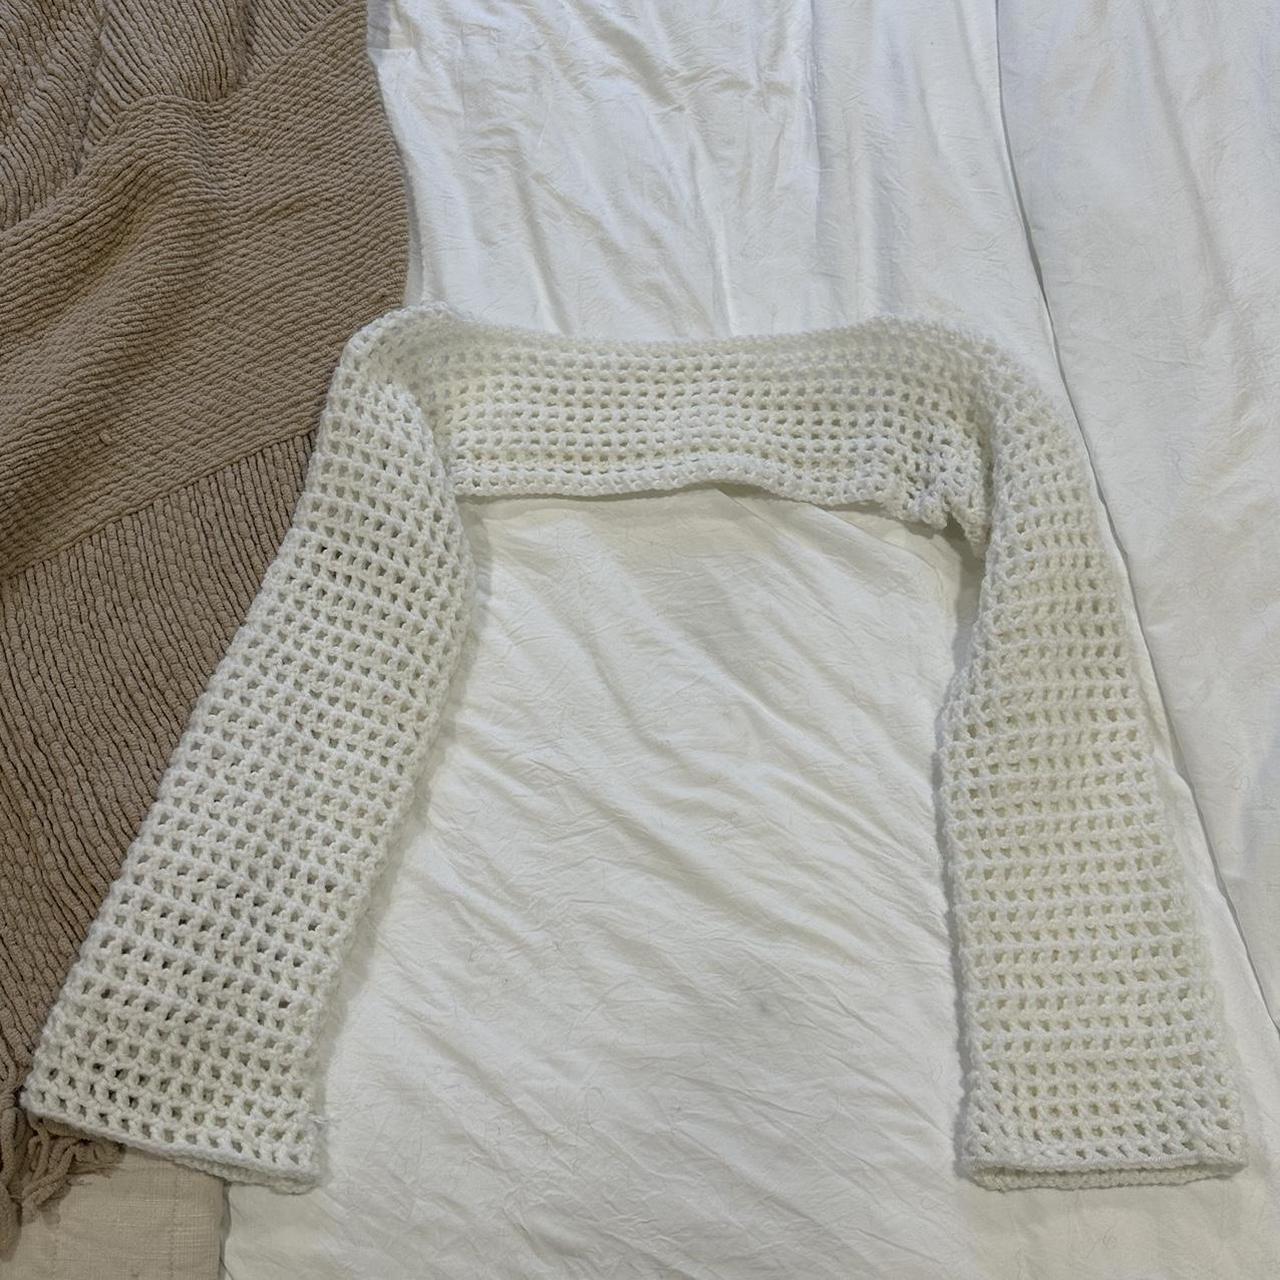 Urban Outfitters Women's Cream and White Jumper (2)